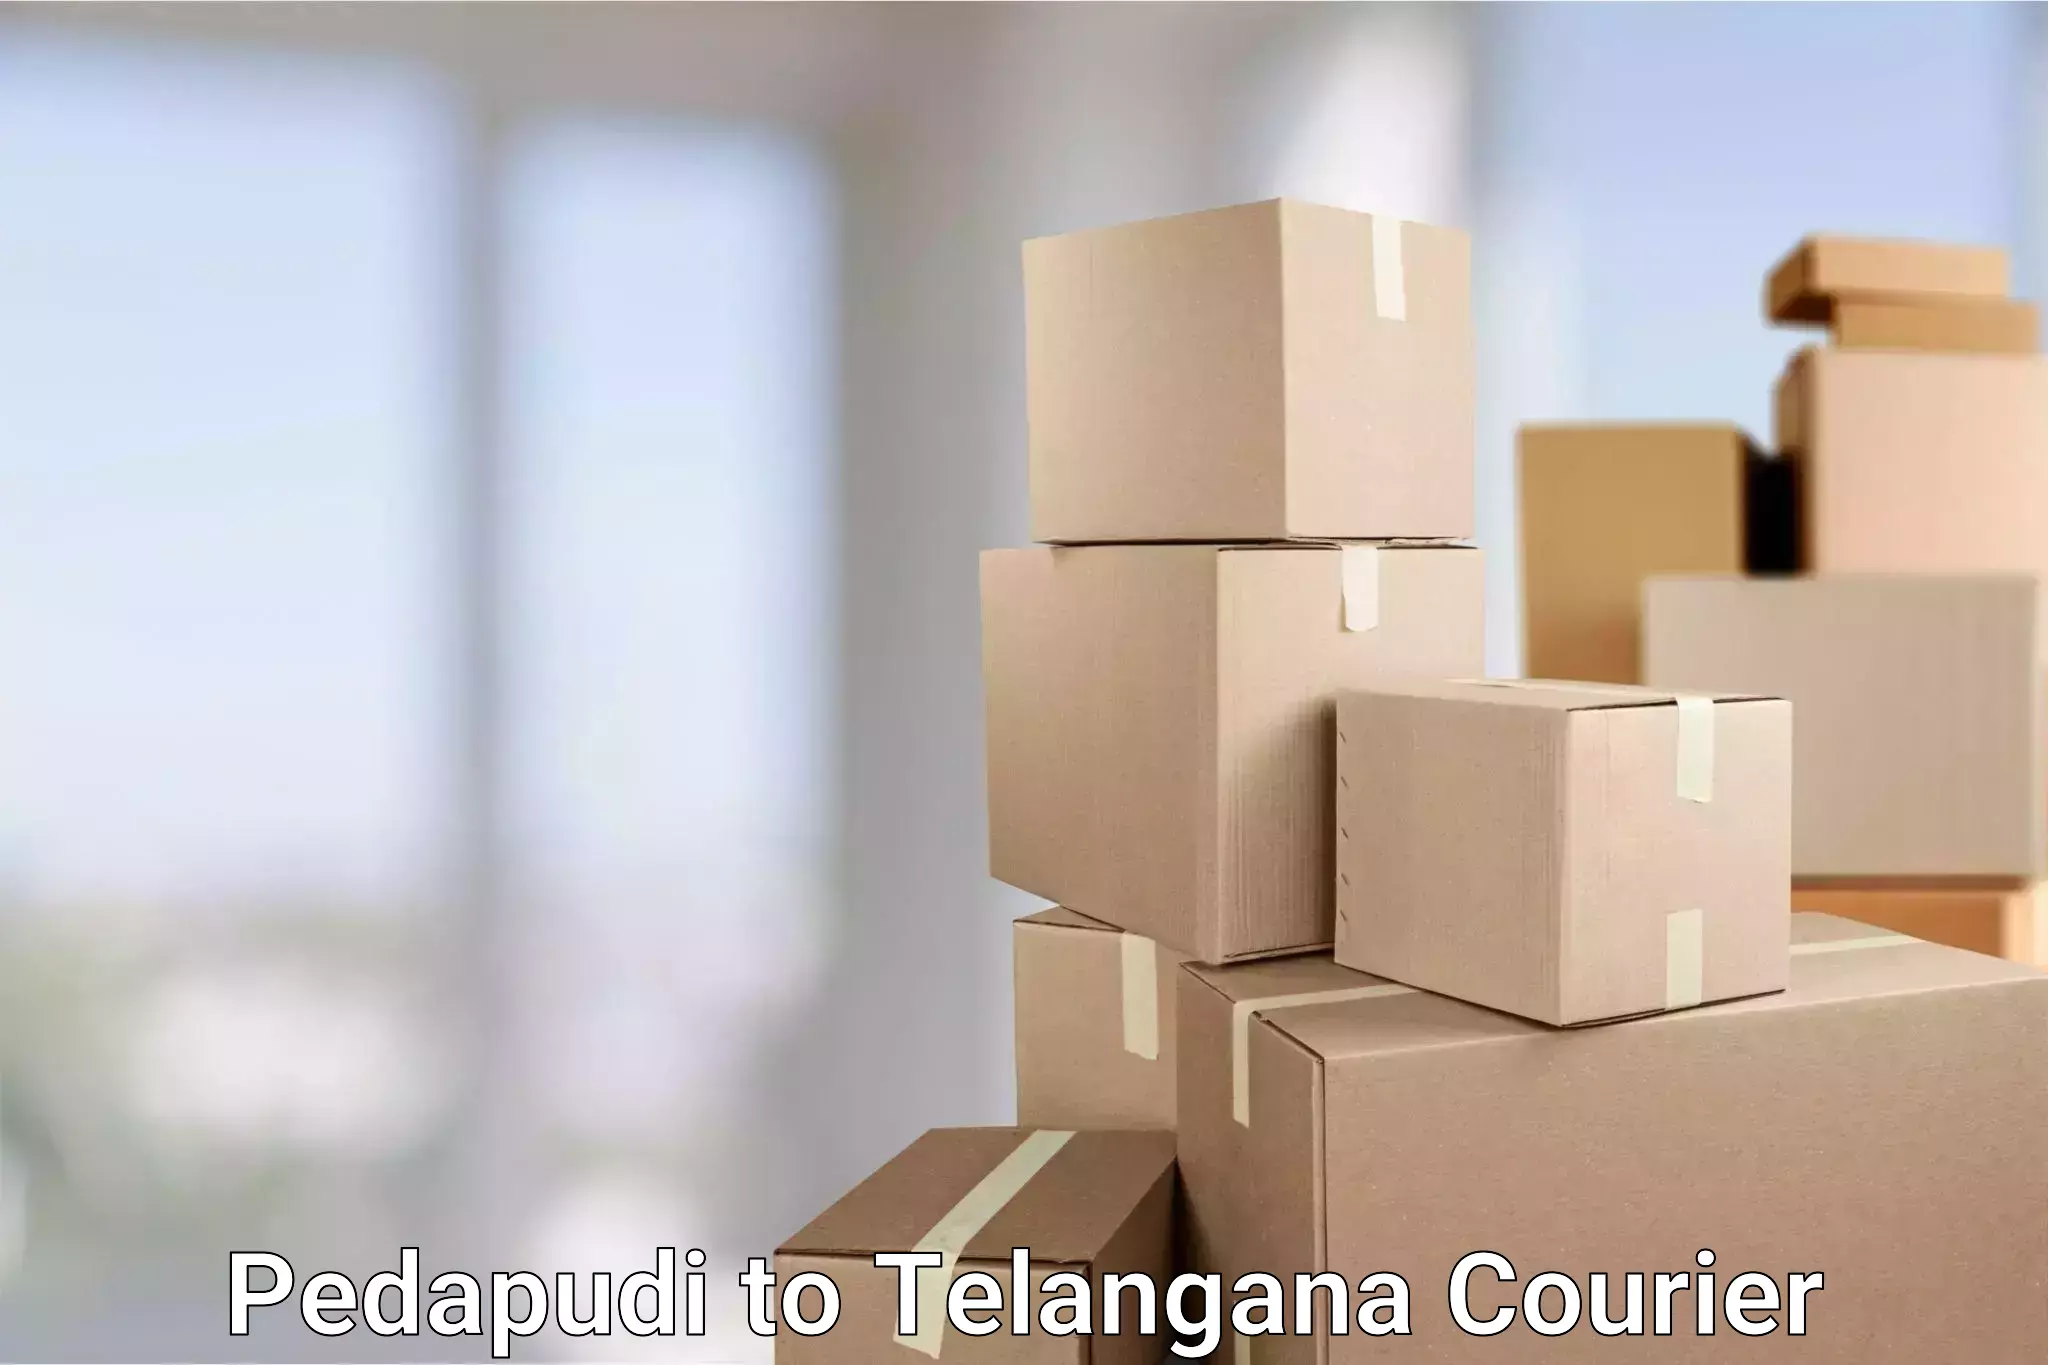 Parcel handling and care Pedapudi to Bodhan